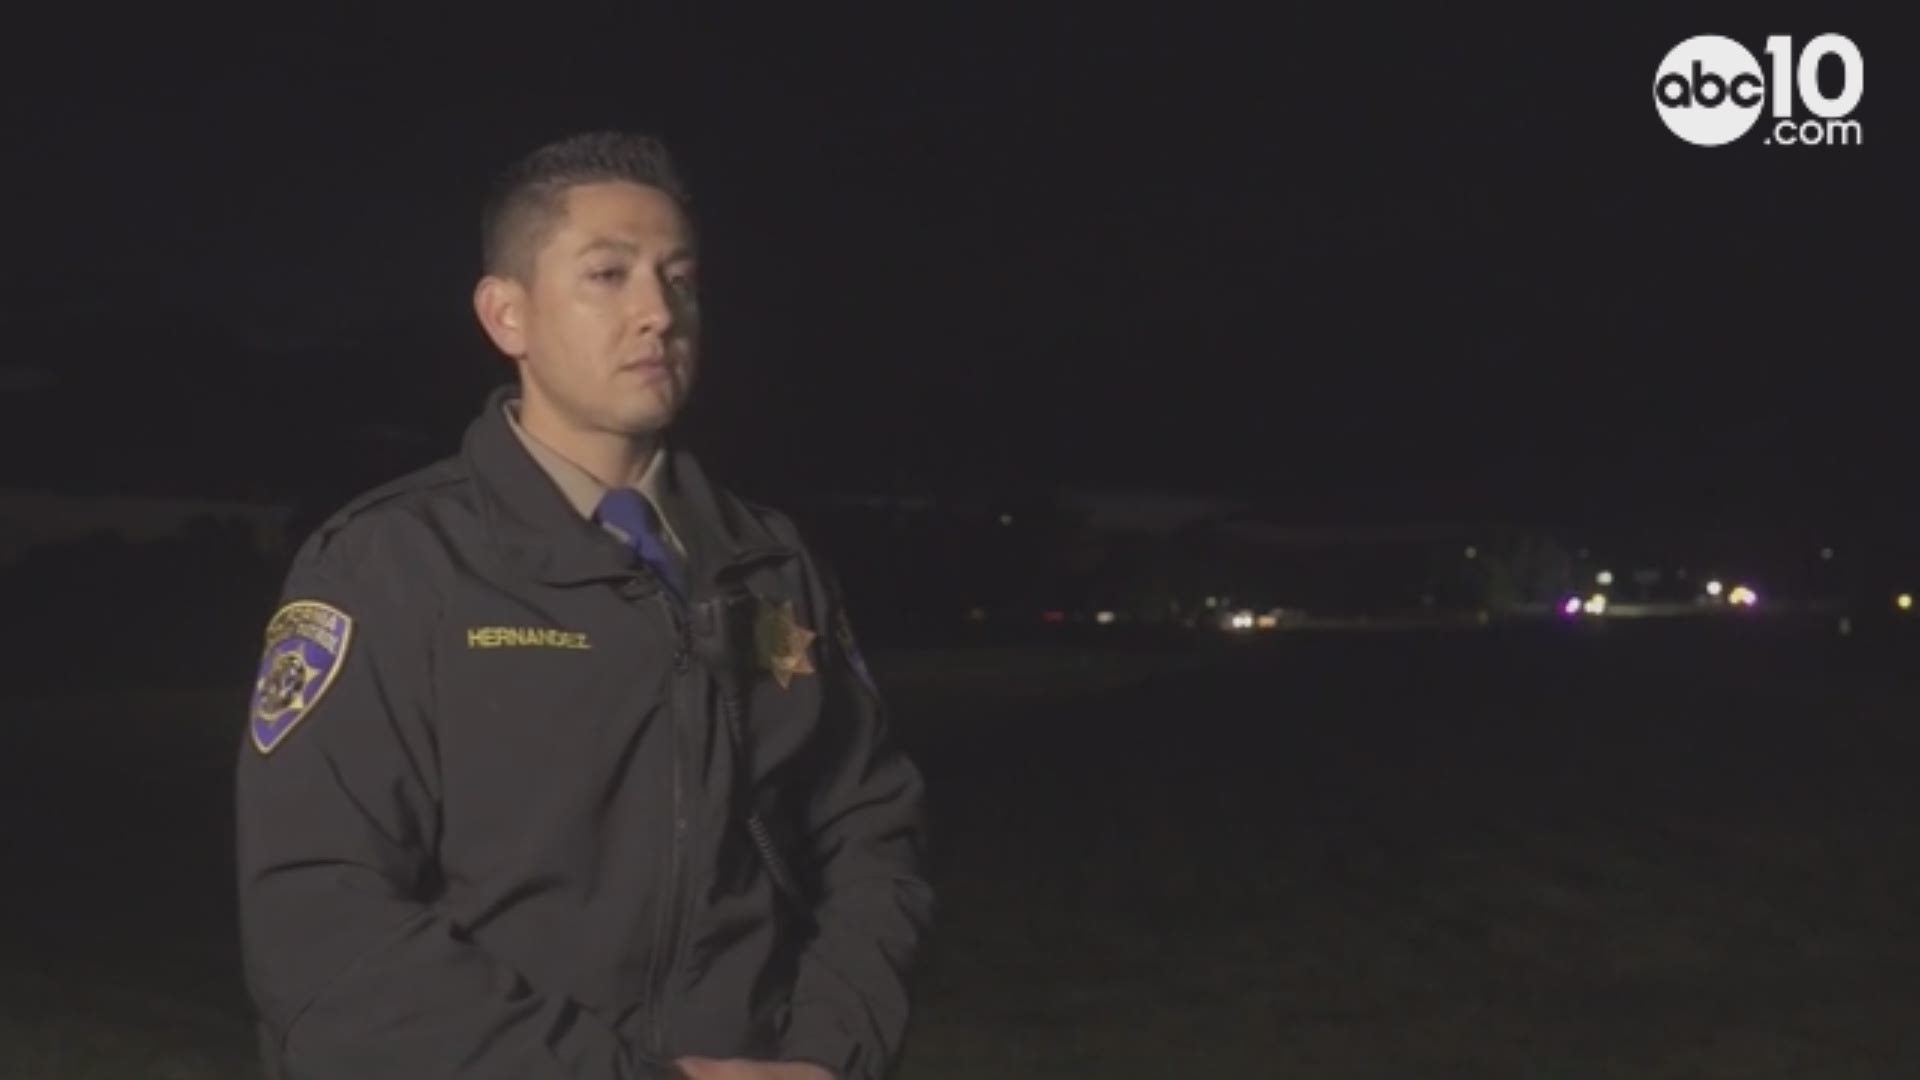 Yuba County Sheriff confirmed that one person died at the scene of the shooting, and another victim was transported to a local hospital for shooting-related injuries. There is no information available about the extent of the second victim's injuries.